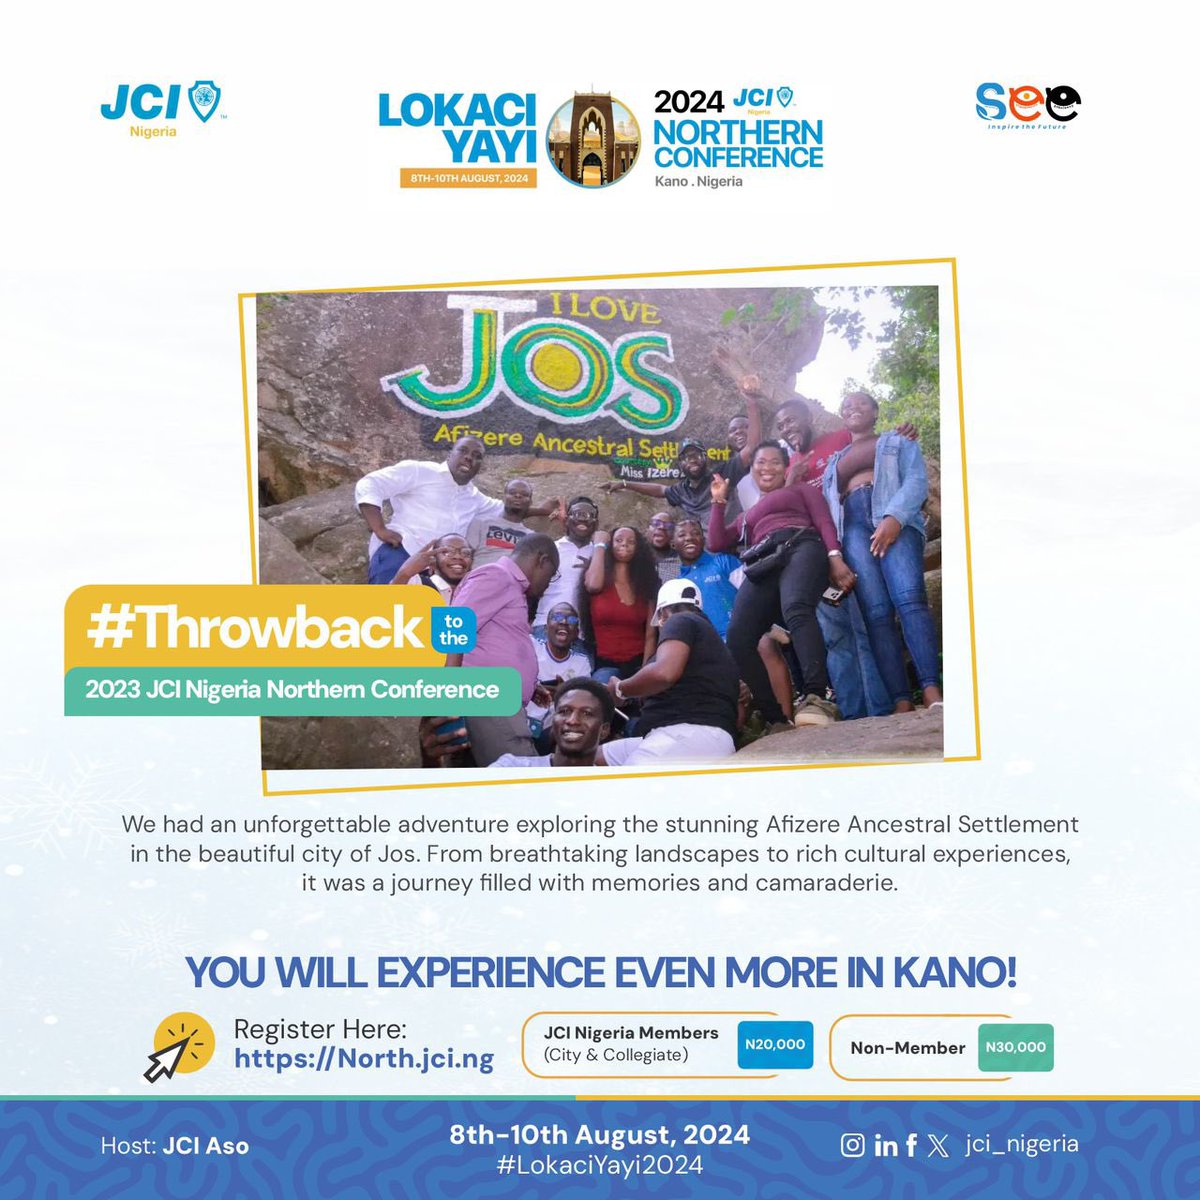 Kano is Calling- Jos was great, but YOU will experience even more in Kano Pack your bags for an epic adventure at the 2024 Northern Conference in the vibrant City of Kano! 1/2